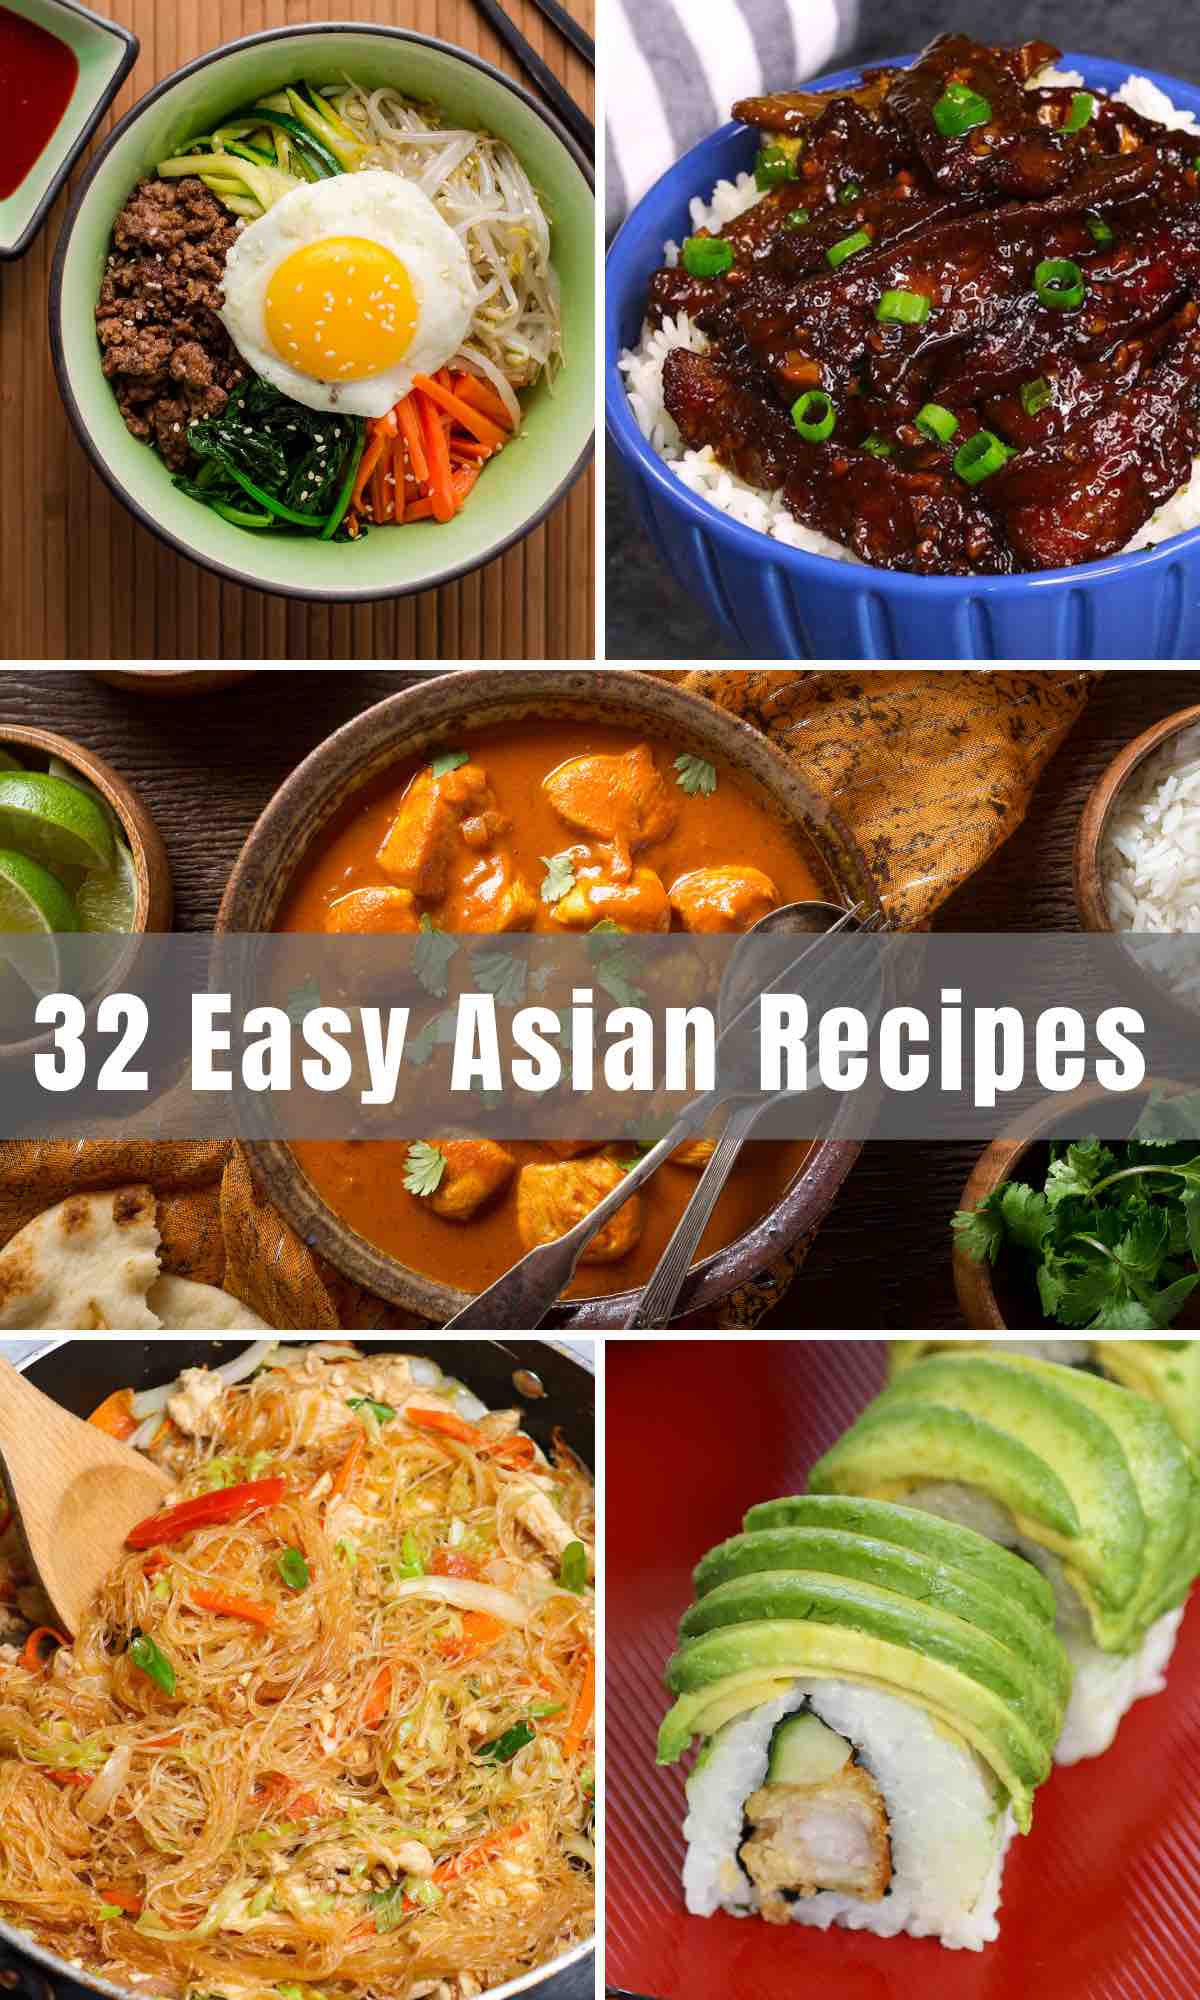 Find out the best Asian Food to try: from Kung Pao Chicken to Dragon Sushi Roll, to Pad Thai and Indian Naan. I’ve covered the most delicious Asian Cuisines includes several major regions including China, Japan, Thailand, Korea, and India. You’ll find simple recipes that you can make at home which will taste just as good as if you had ordered from a restaurant.